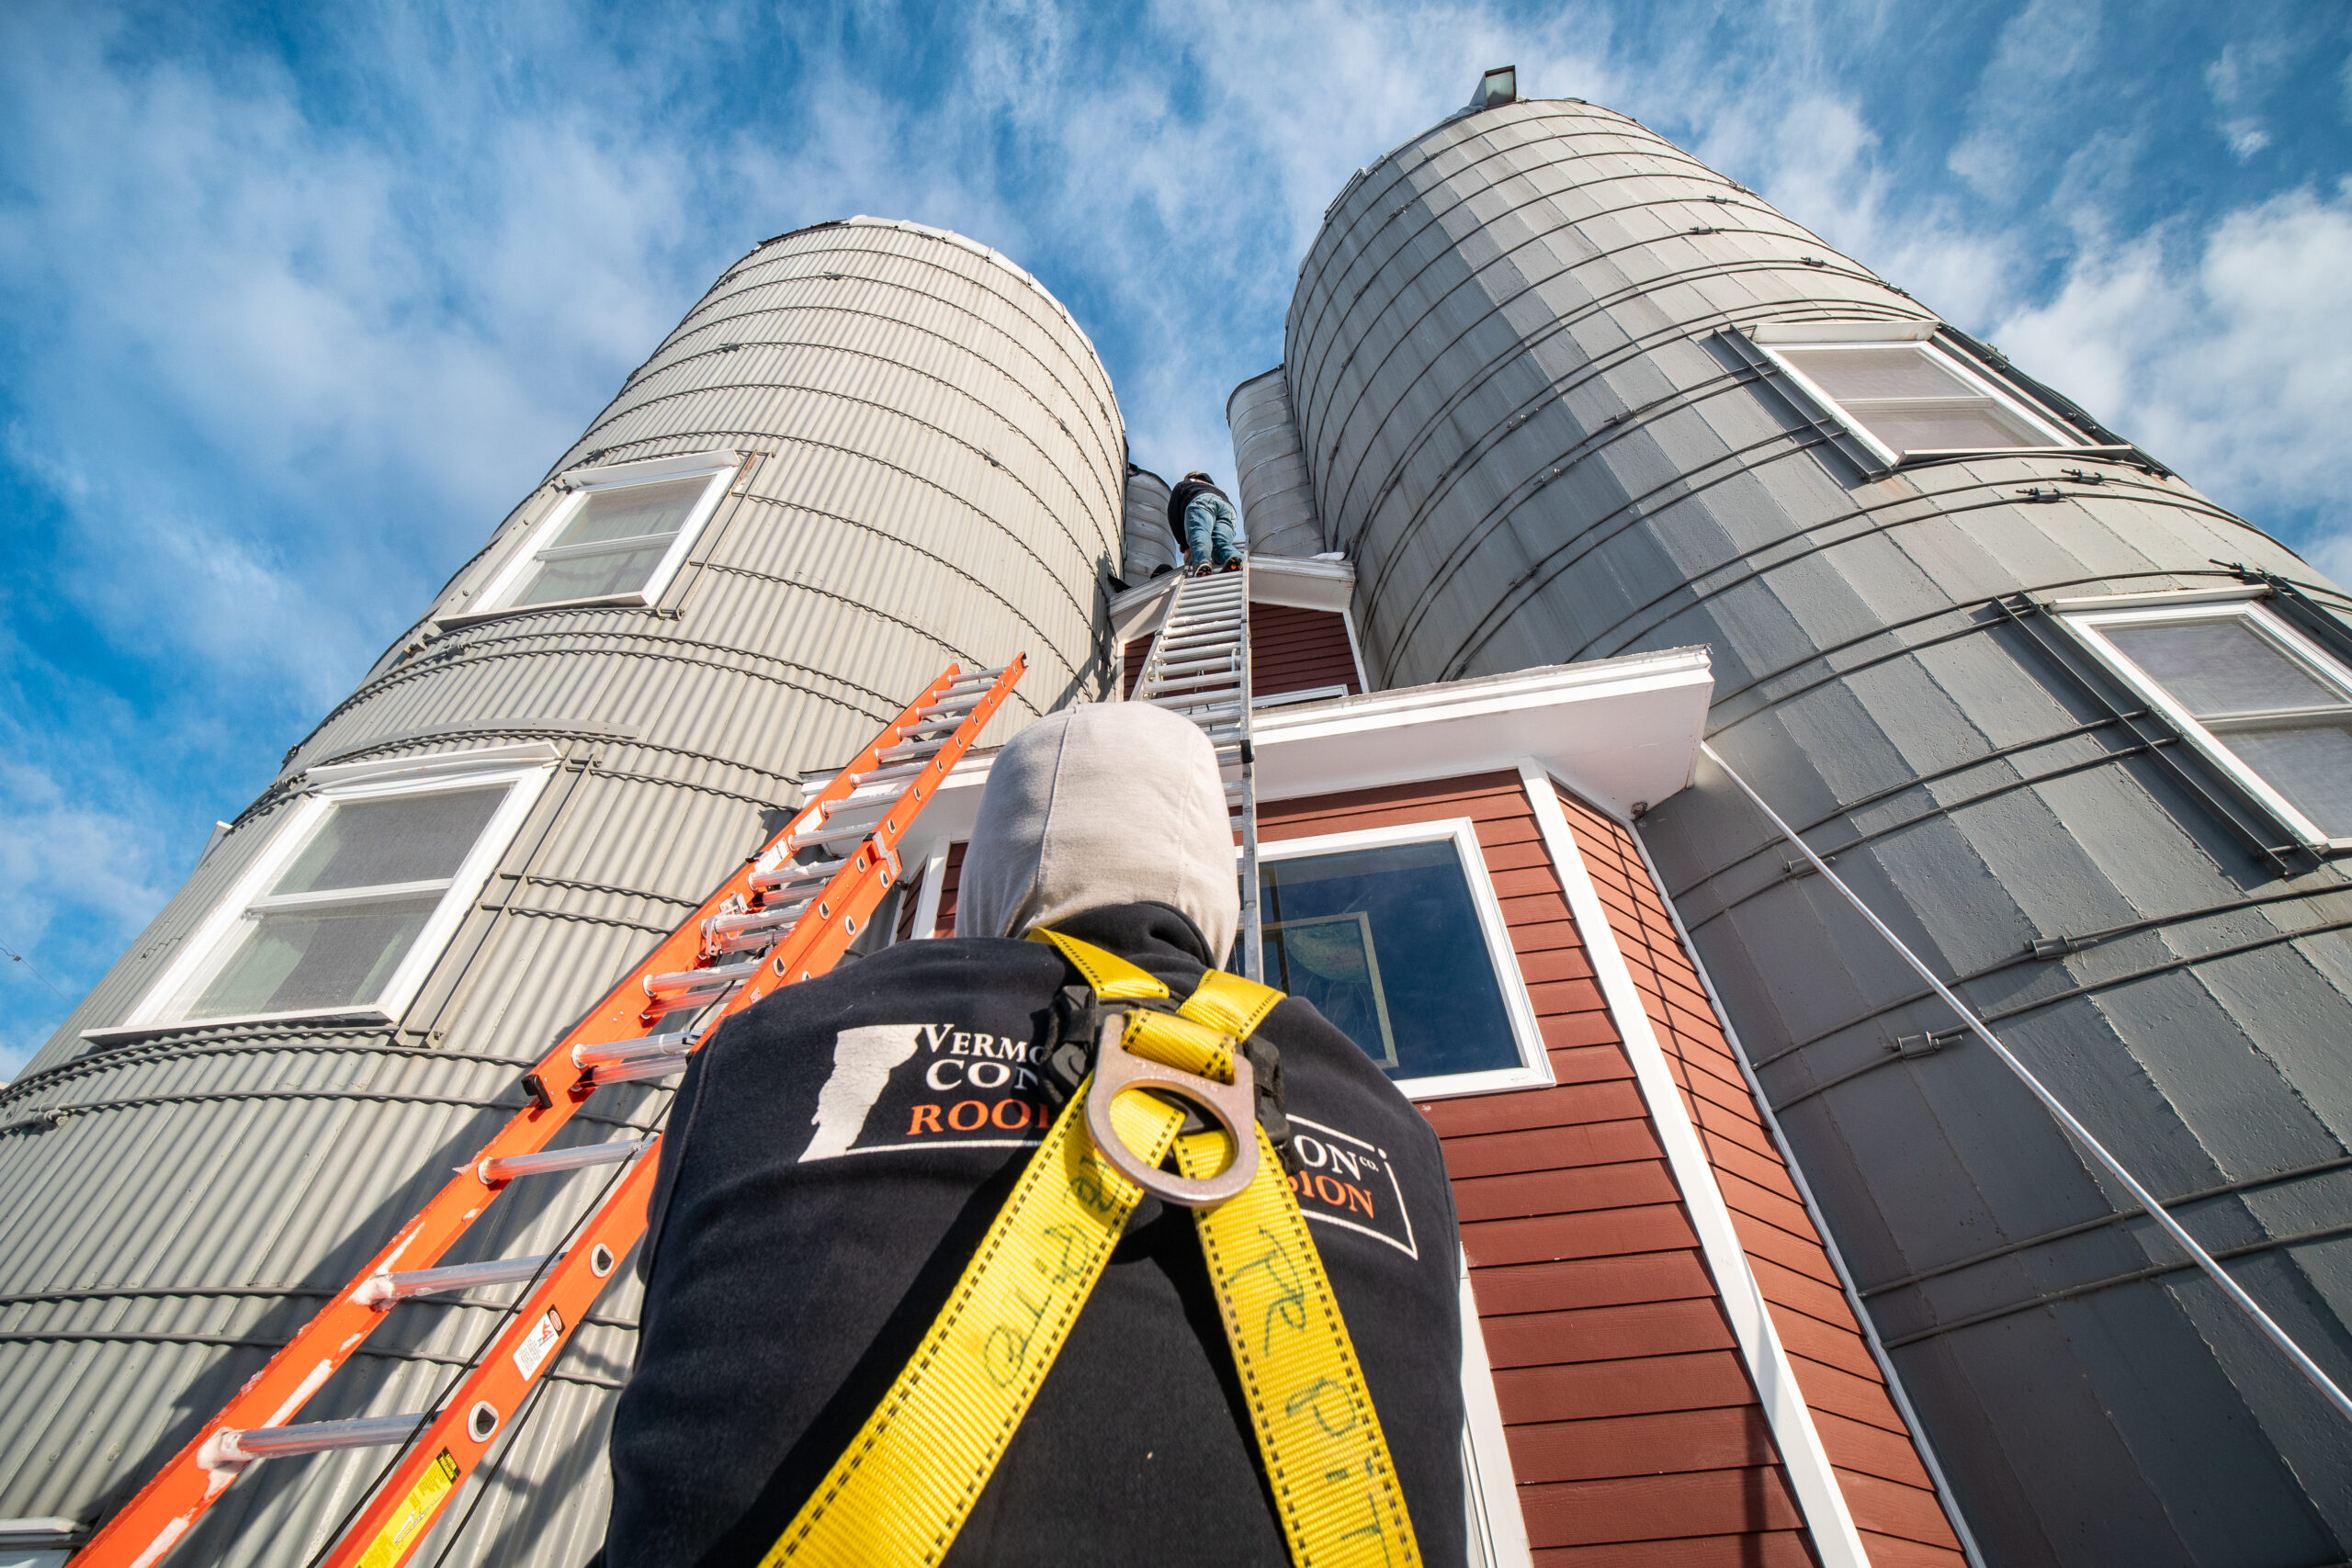 Vermont Construction Company roofer climbing up a ladder between two barn silos to perform a roof inspection